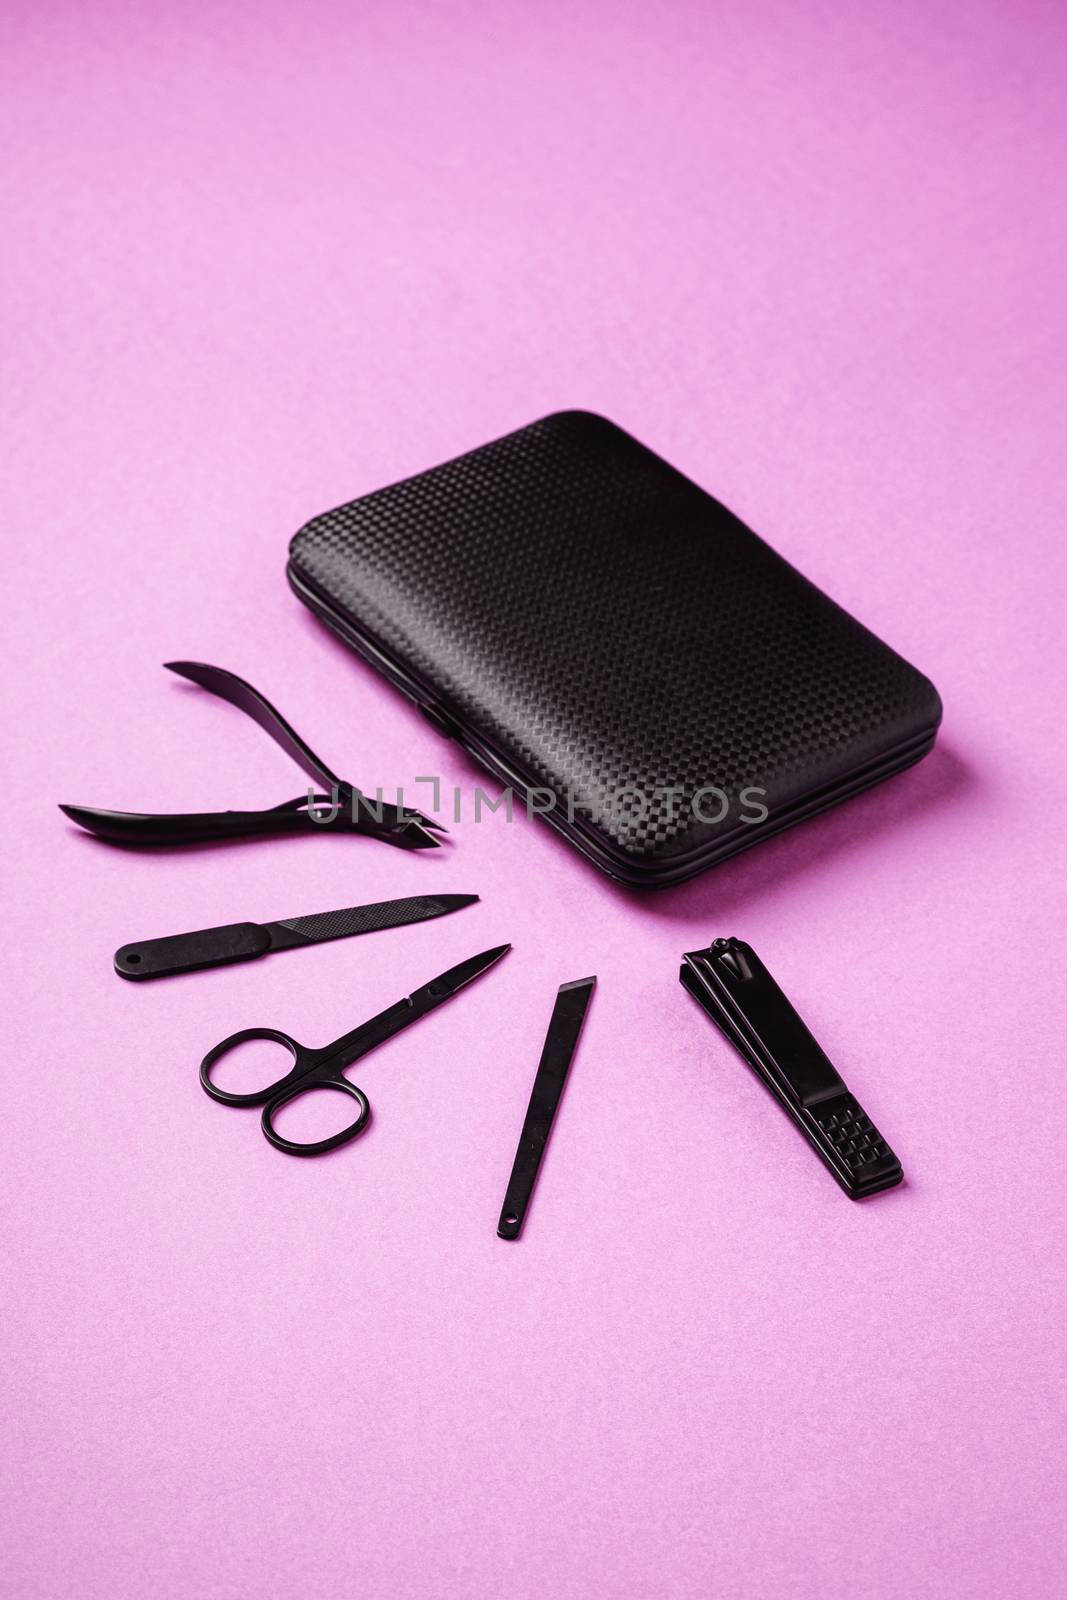 Set of manicure and pedicure tools and accessories near to case, angle view, pink background